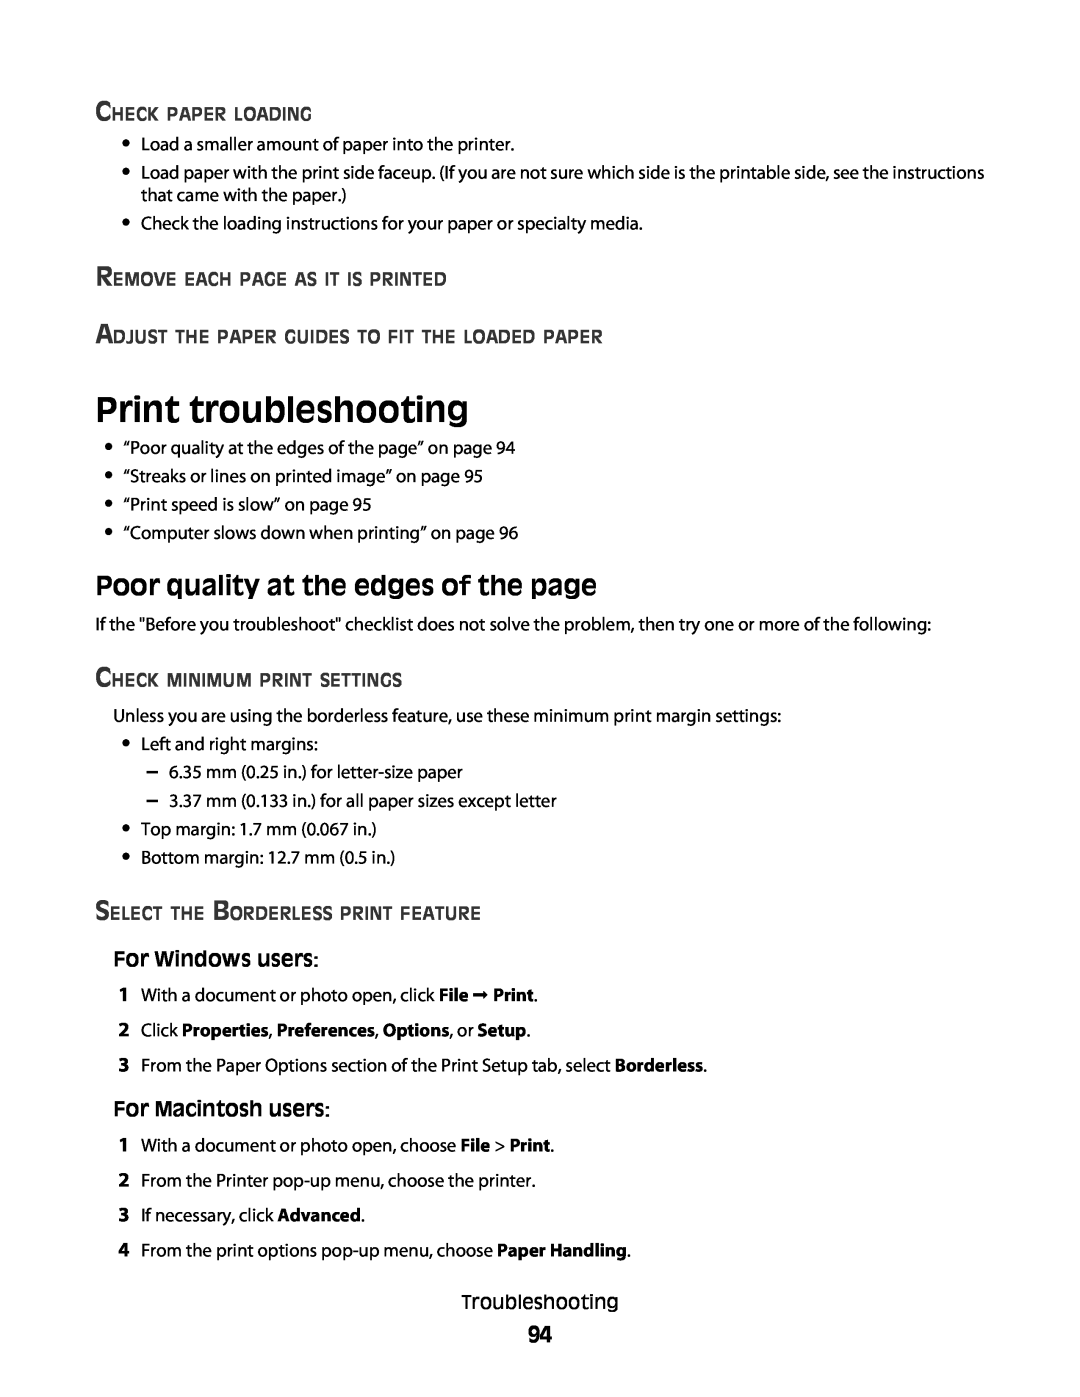 Lexmark 101, 10E manual Print troubleshooting, Poor quality at the edges of the page, For Windows users, For Macintosh users 